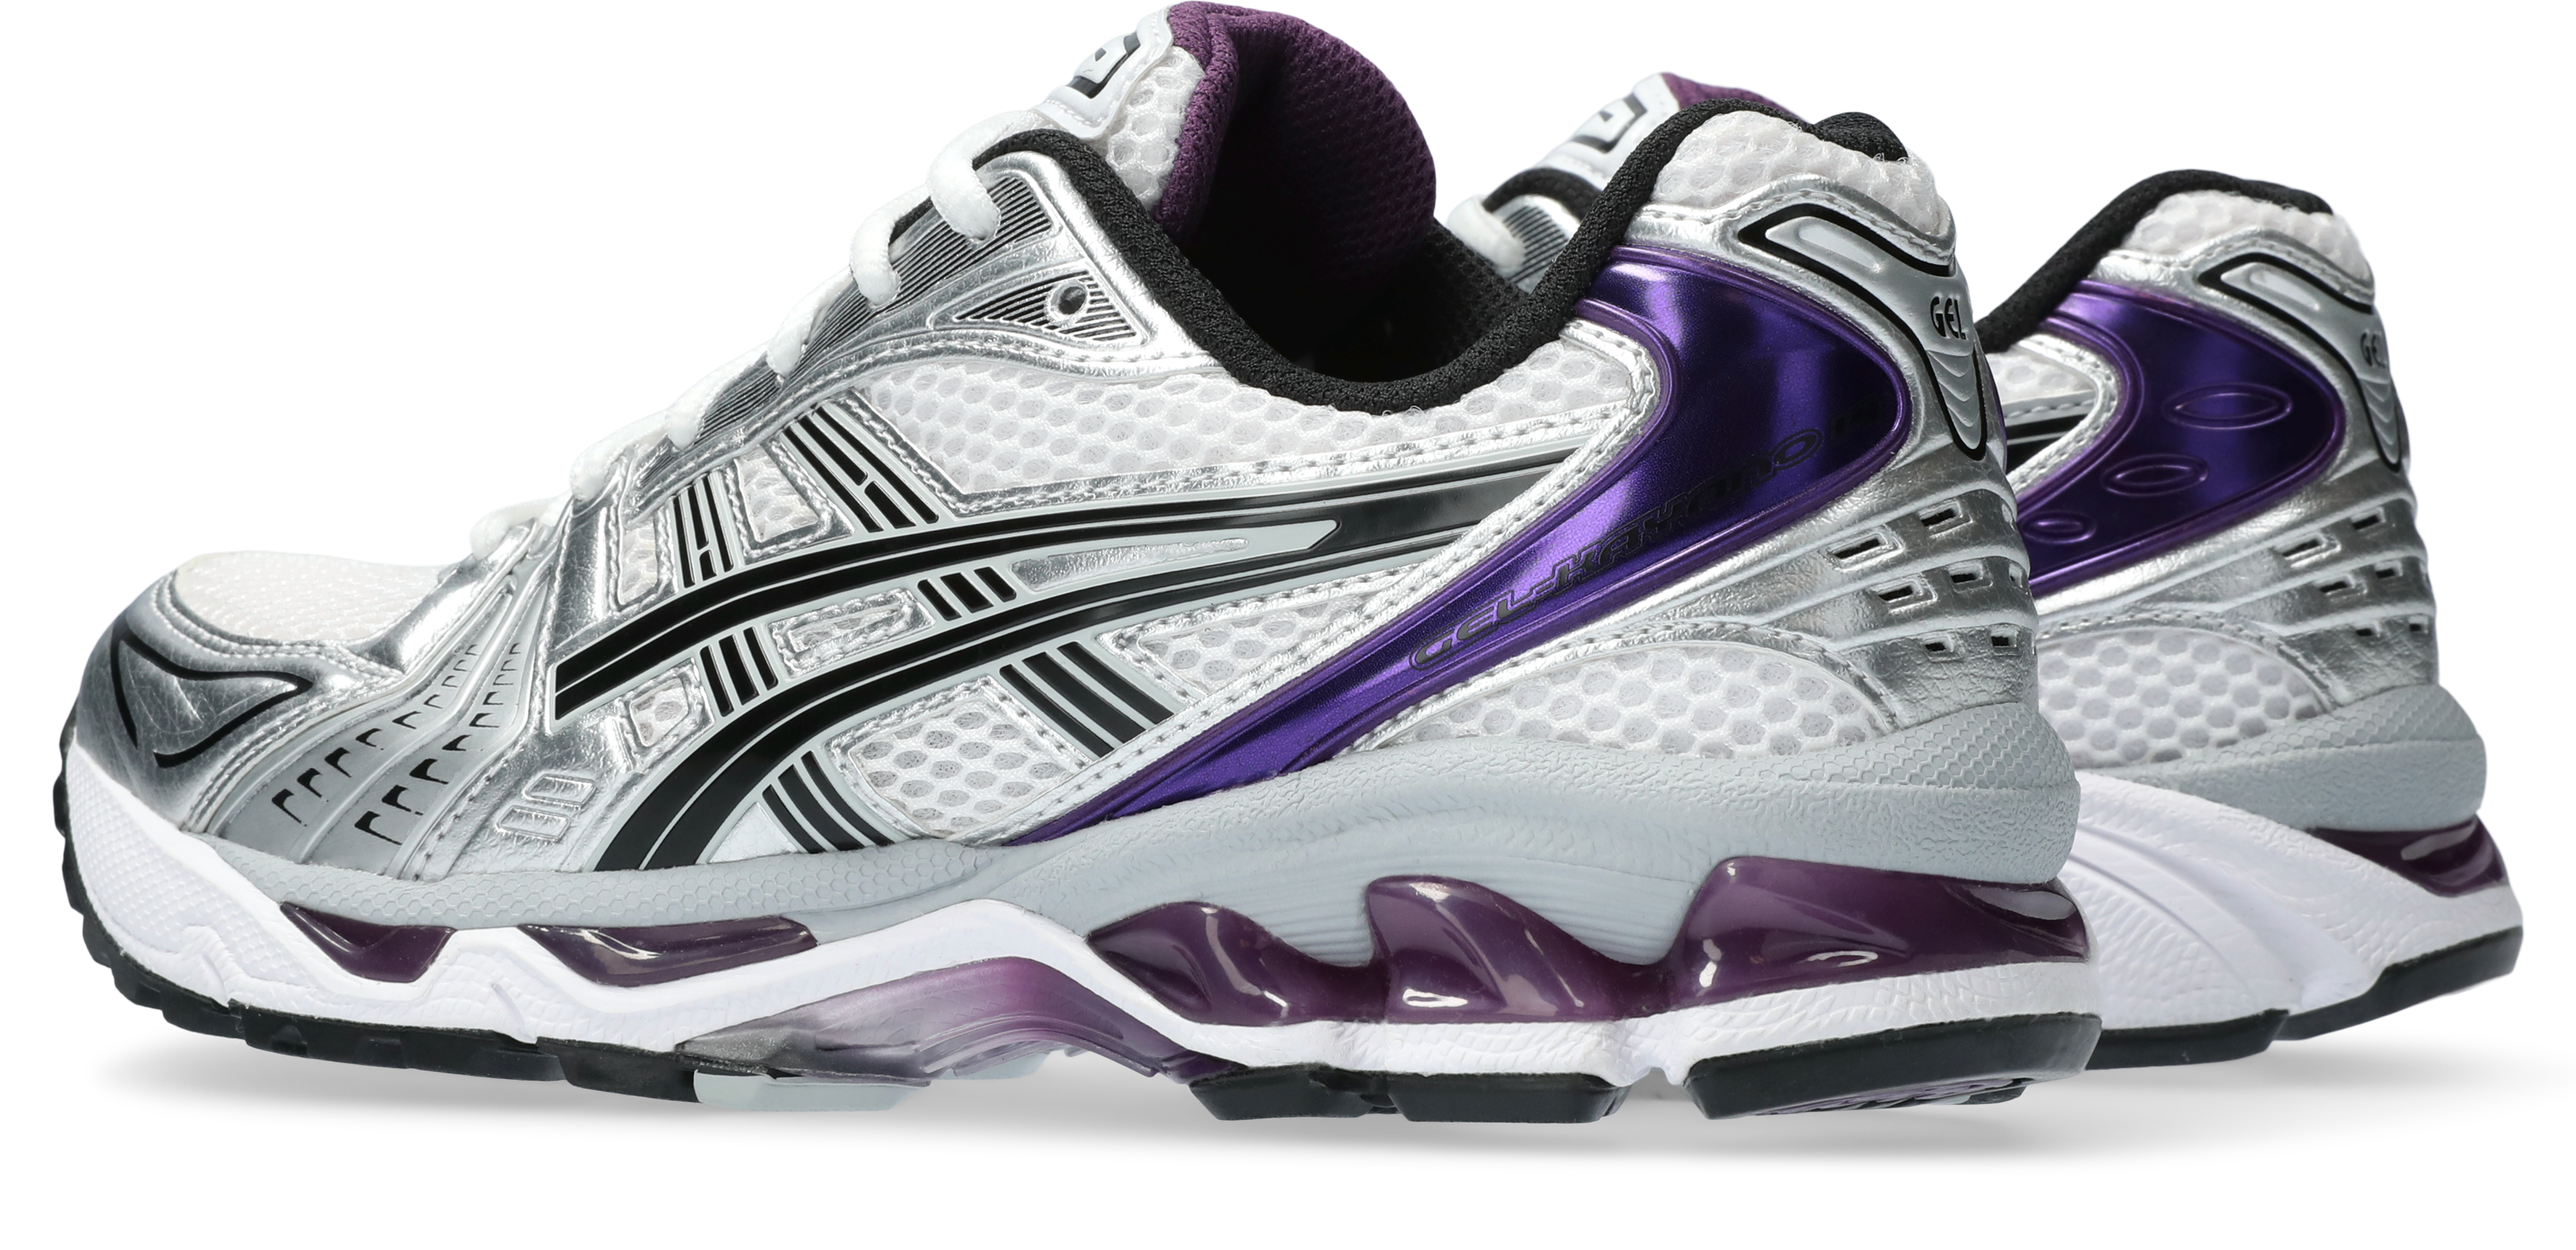 ASICS Kayano 14 sneakers in a vibrant Purple Metallic colorway, reflecting a mix of retro aesthetics and contemporary design elements in a strikingly glossy finish.